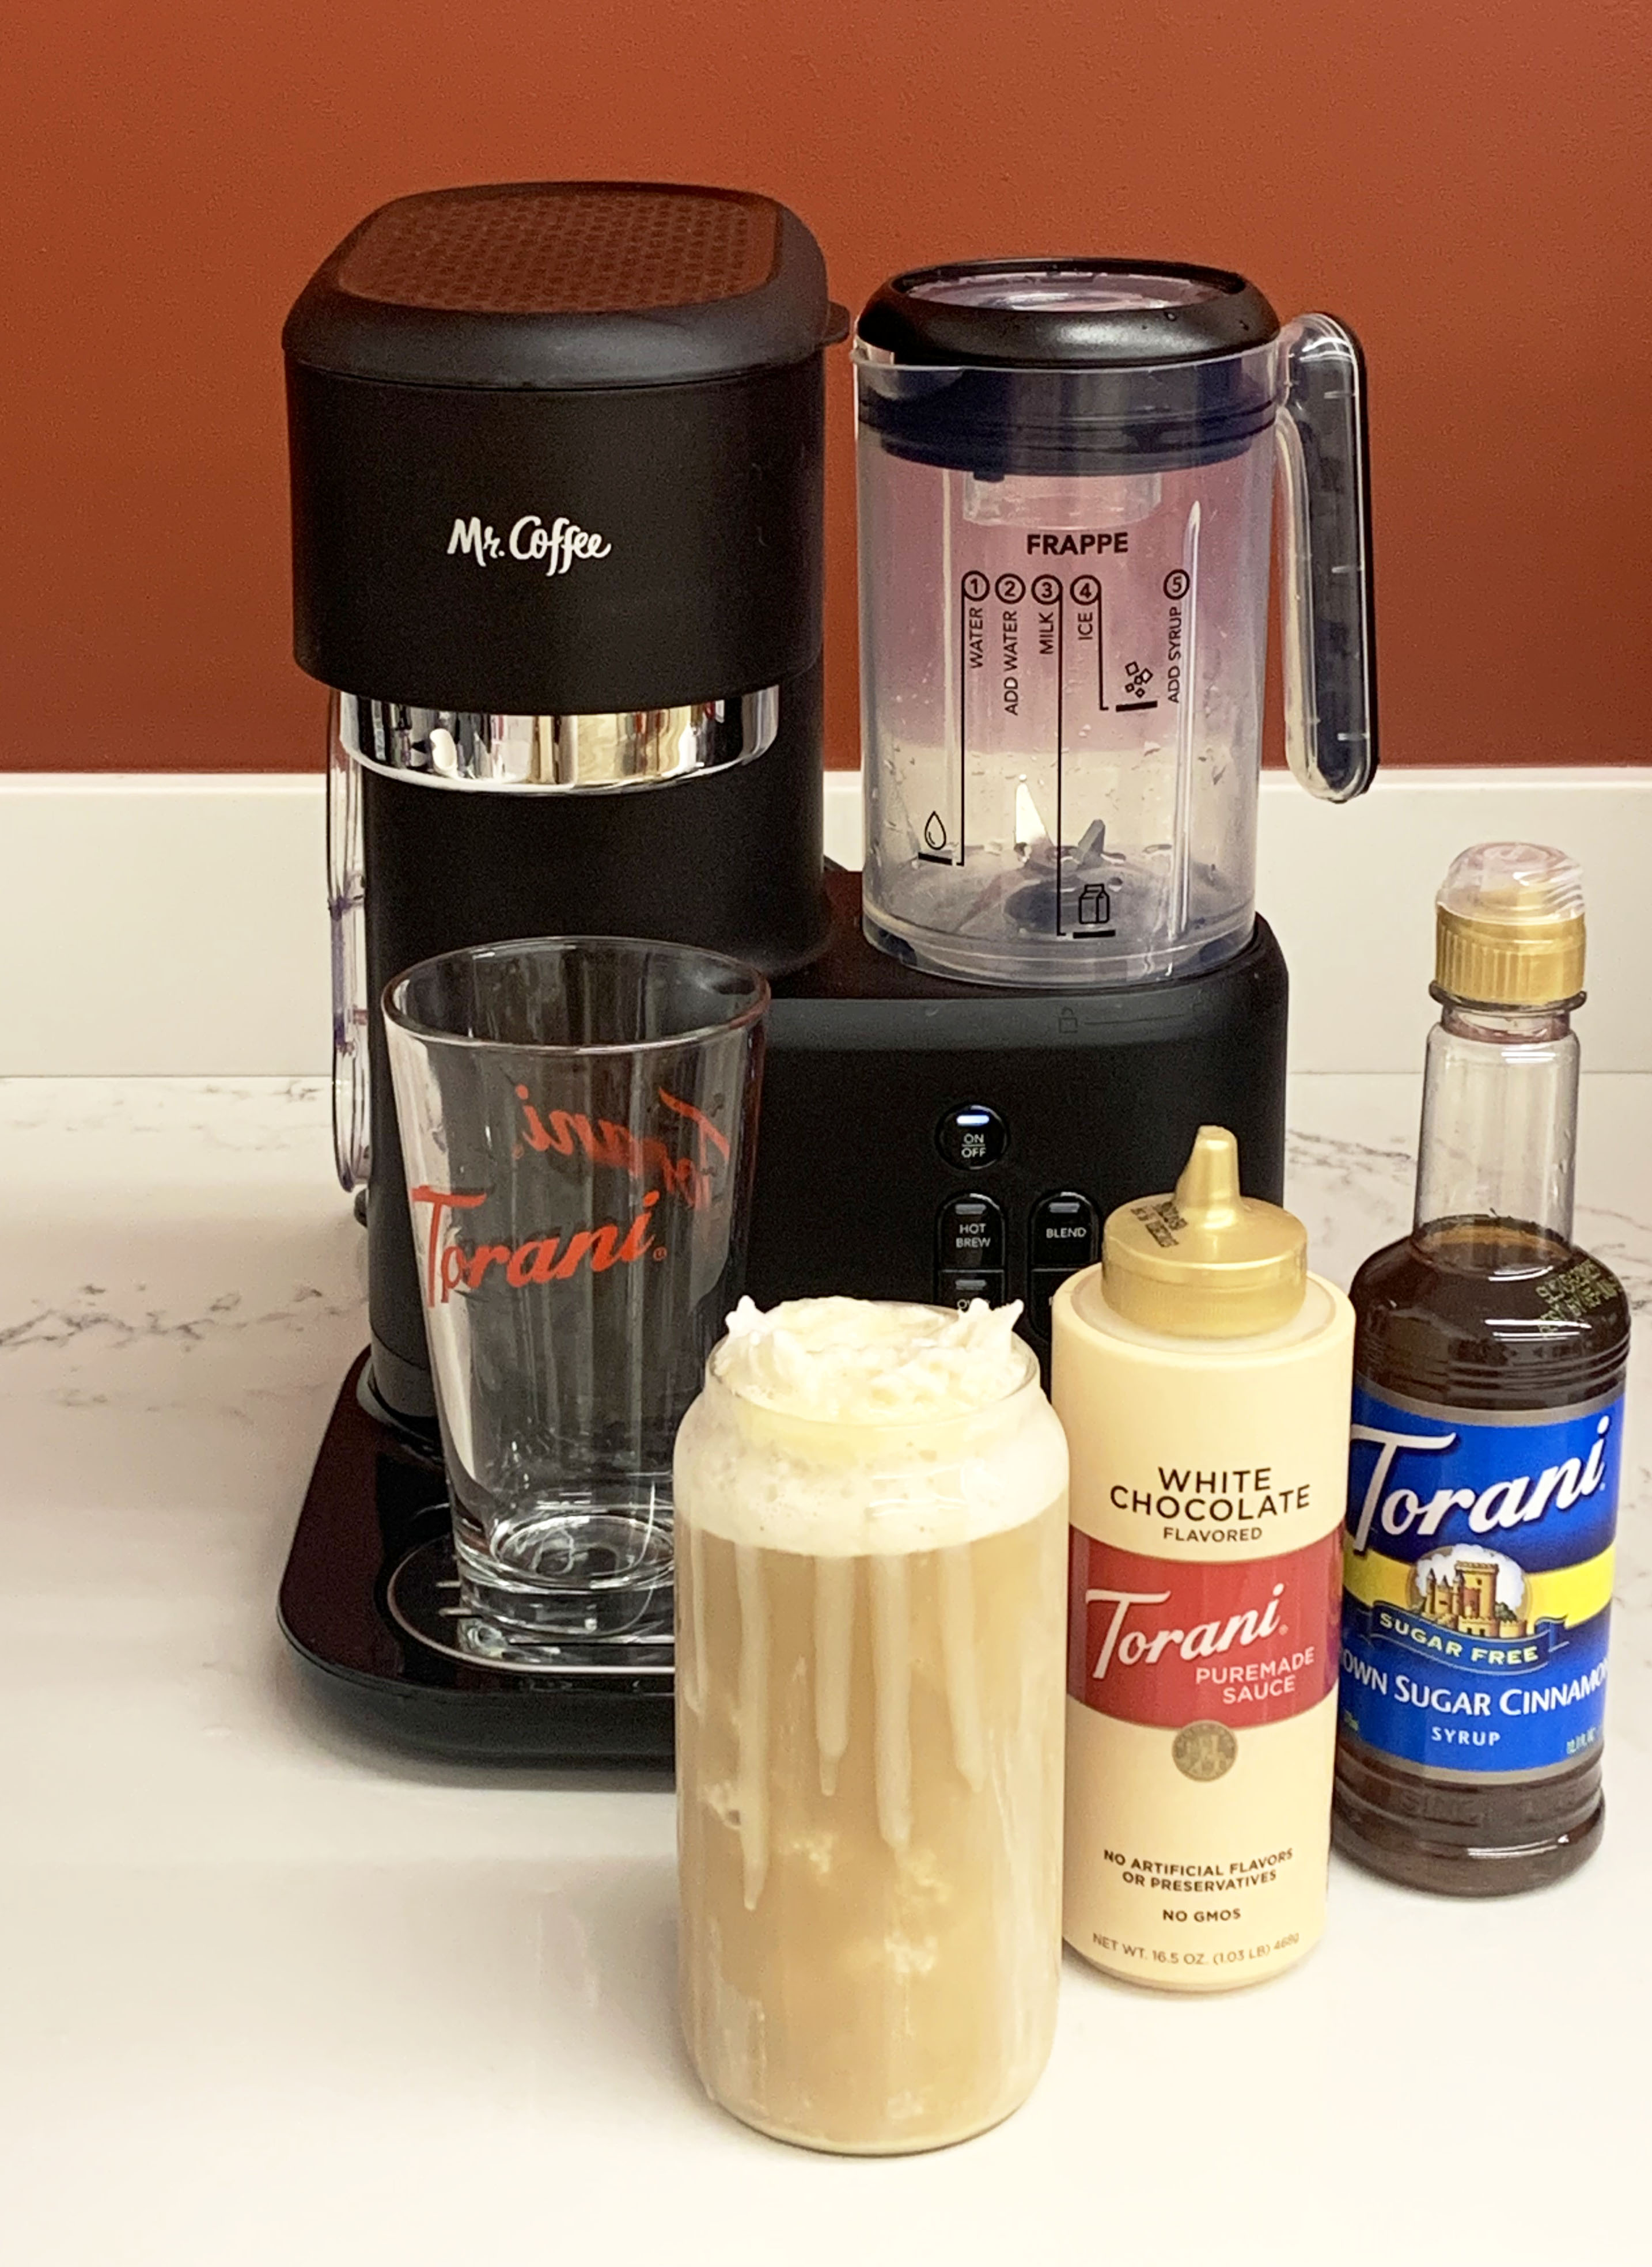  Mr. Coffee 3-in-1 Single-Serve Frappe, Iced & Hot